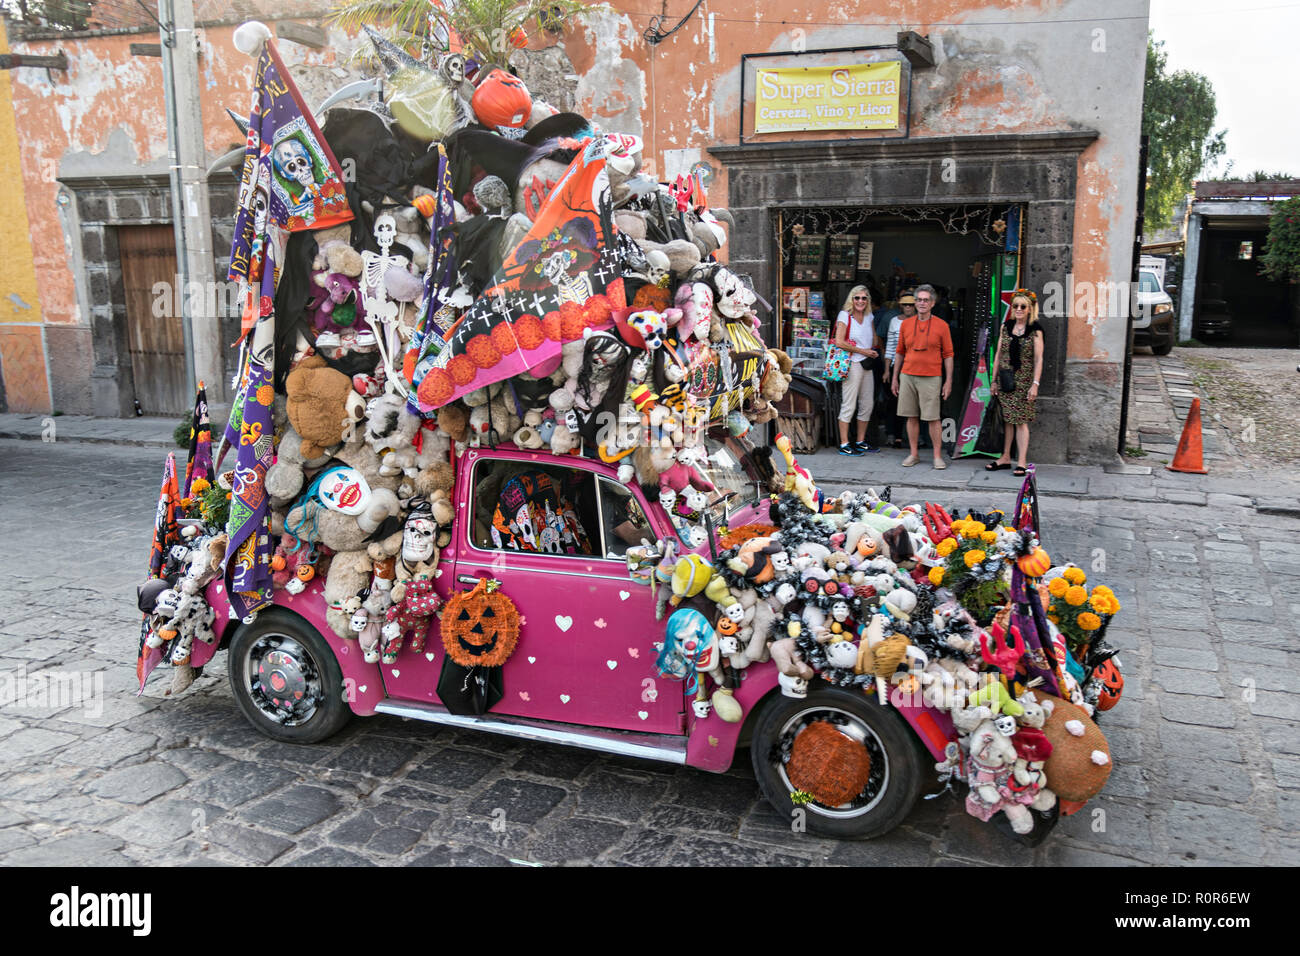 A Volkswagen Beetle art car decorated for Halloween and Dead of the Dead festivals drives down through the expat neighborhood of San Antonio in San Miguel de Allende, Mexico. Stock Photo